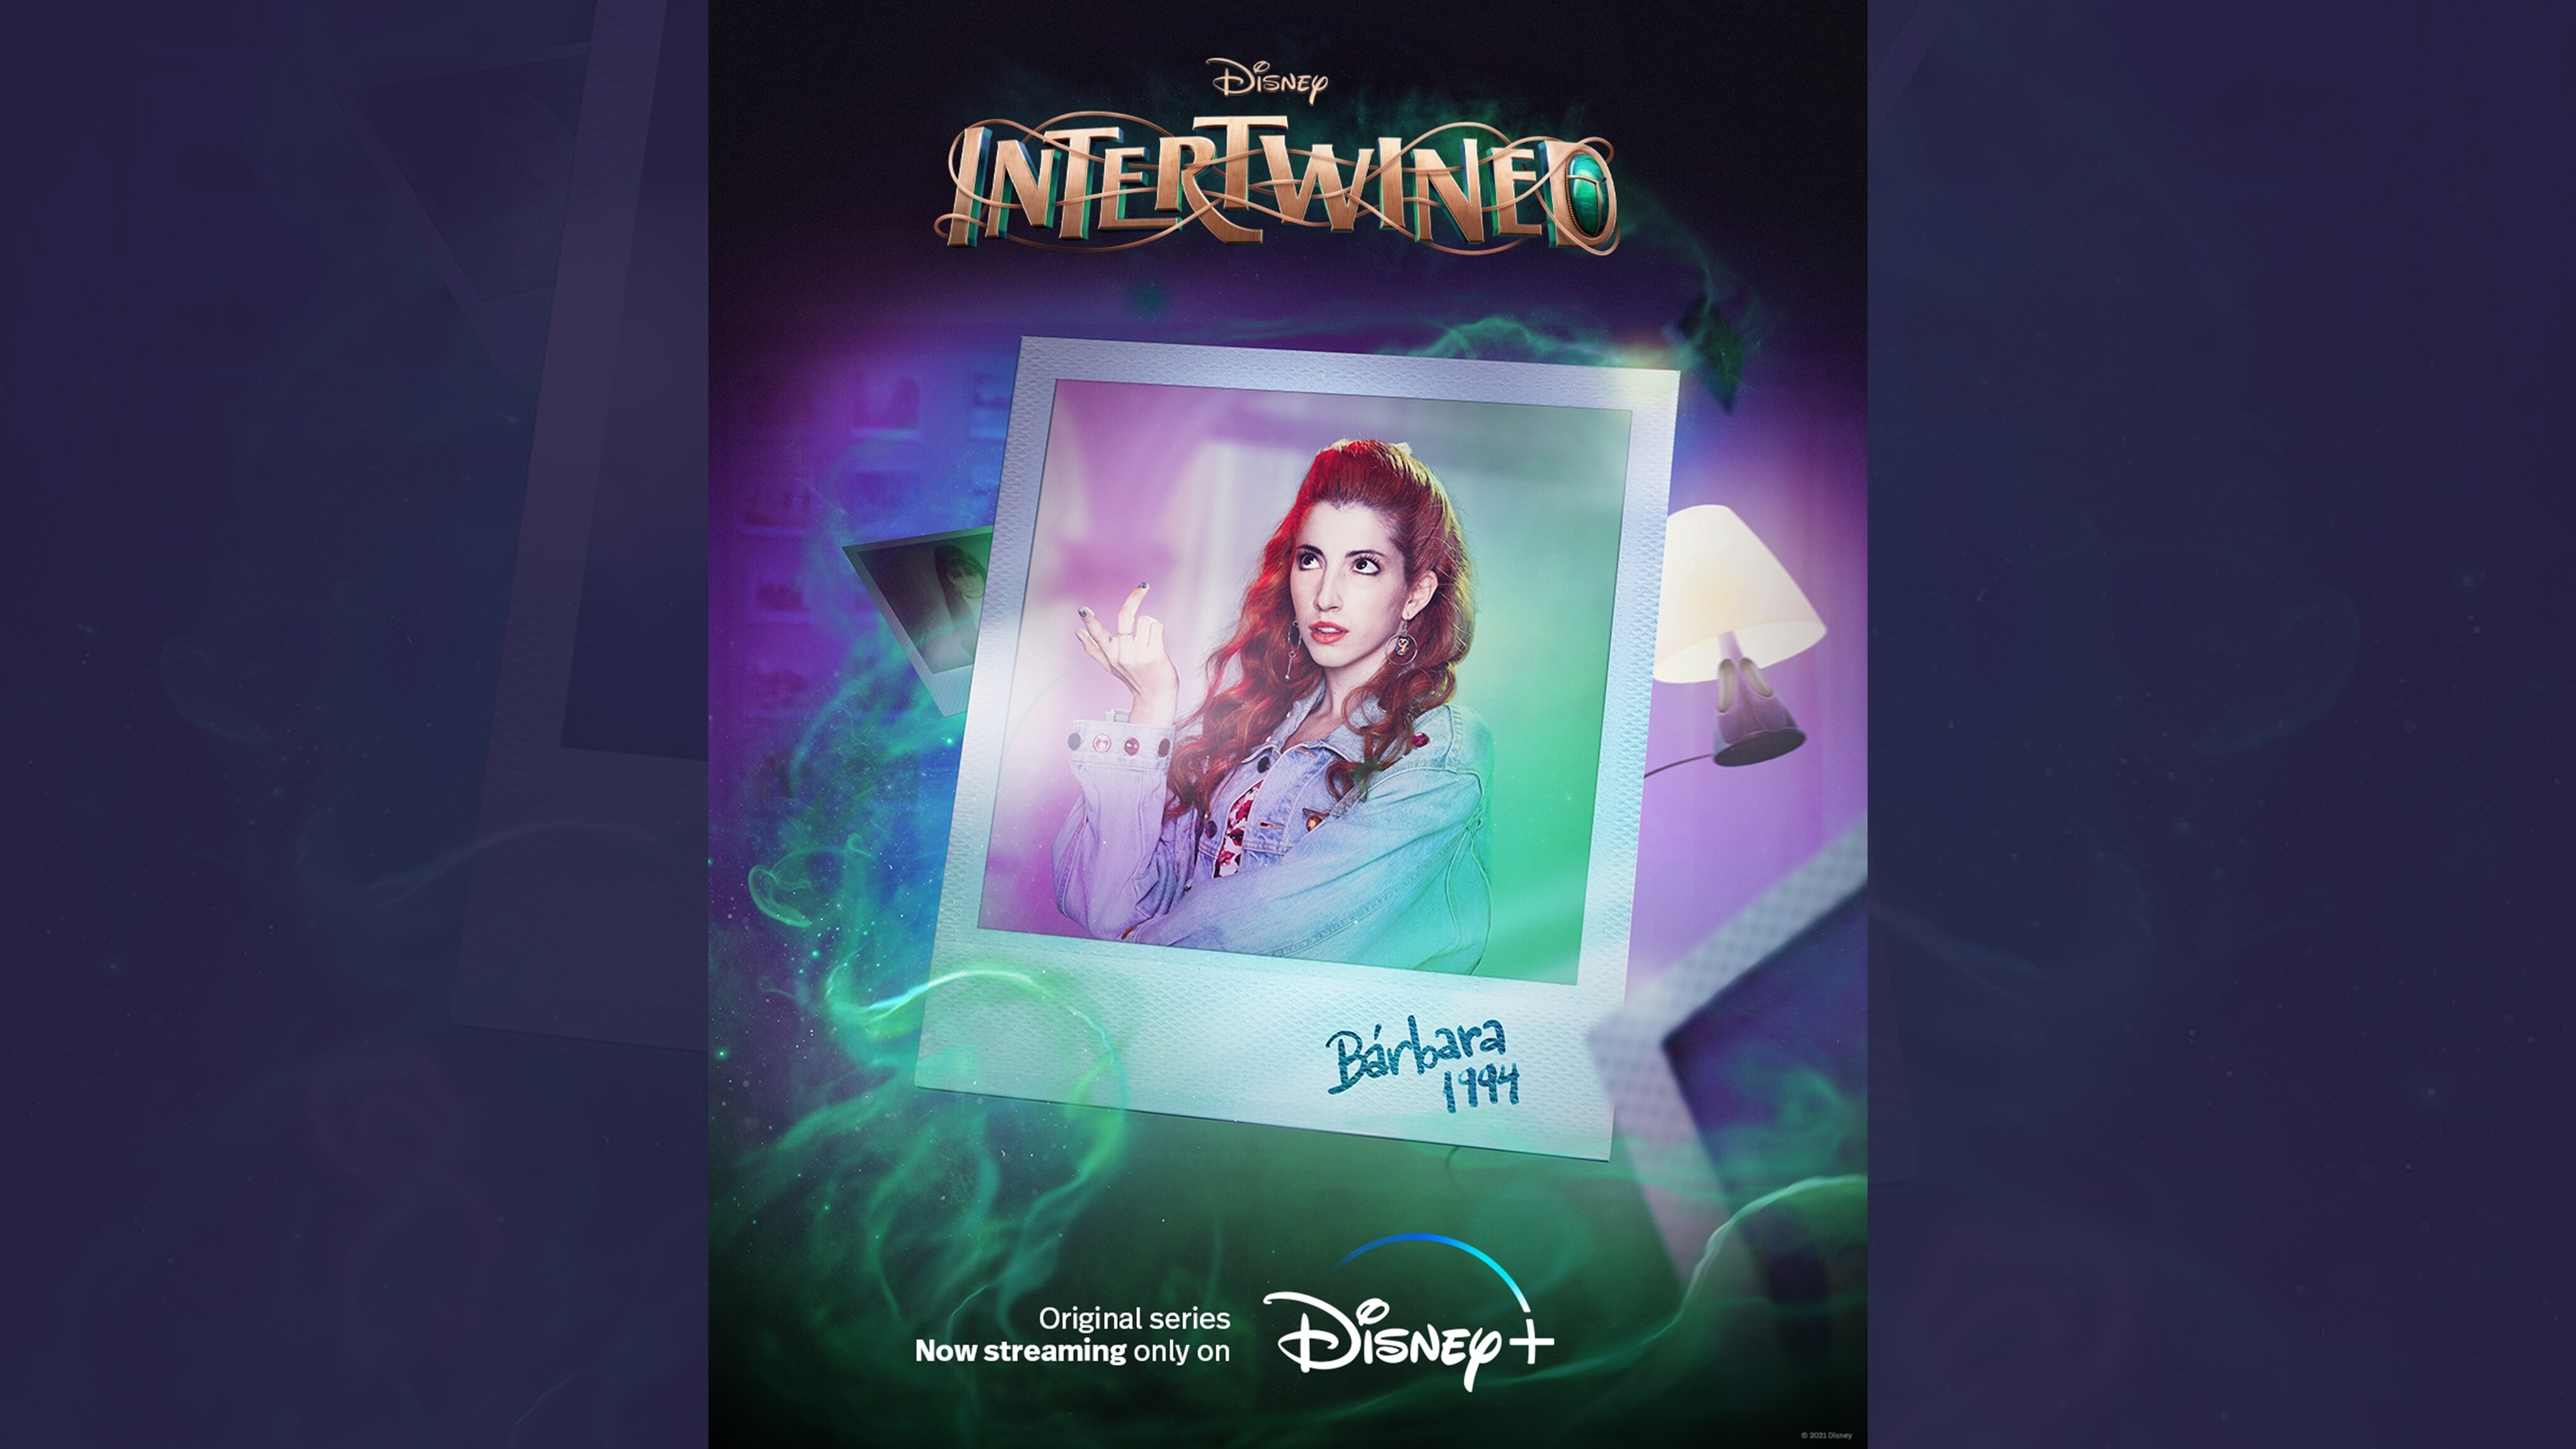 Disney | Intertwined | Barbara (1994) | Original series now streaming only on Disney+